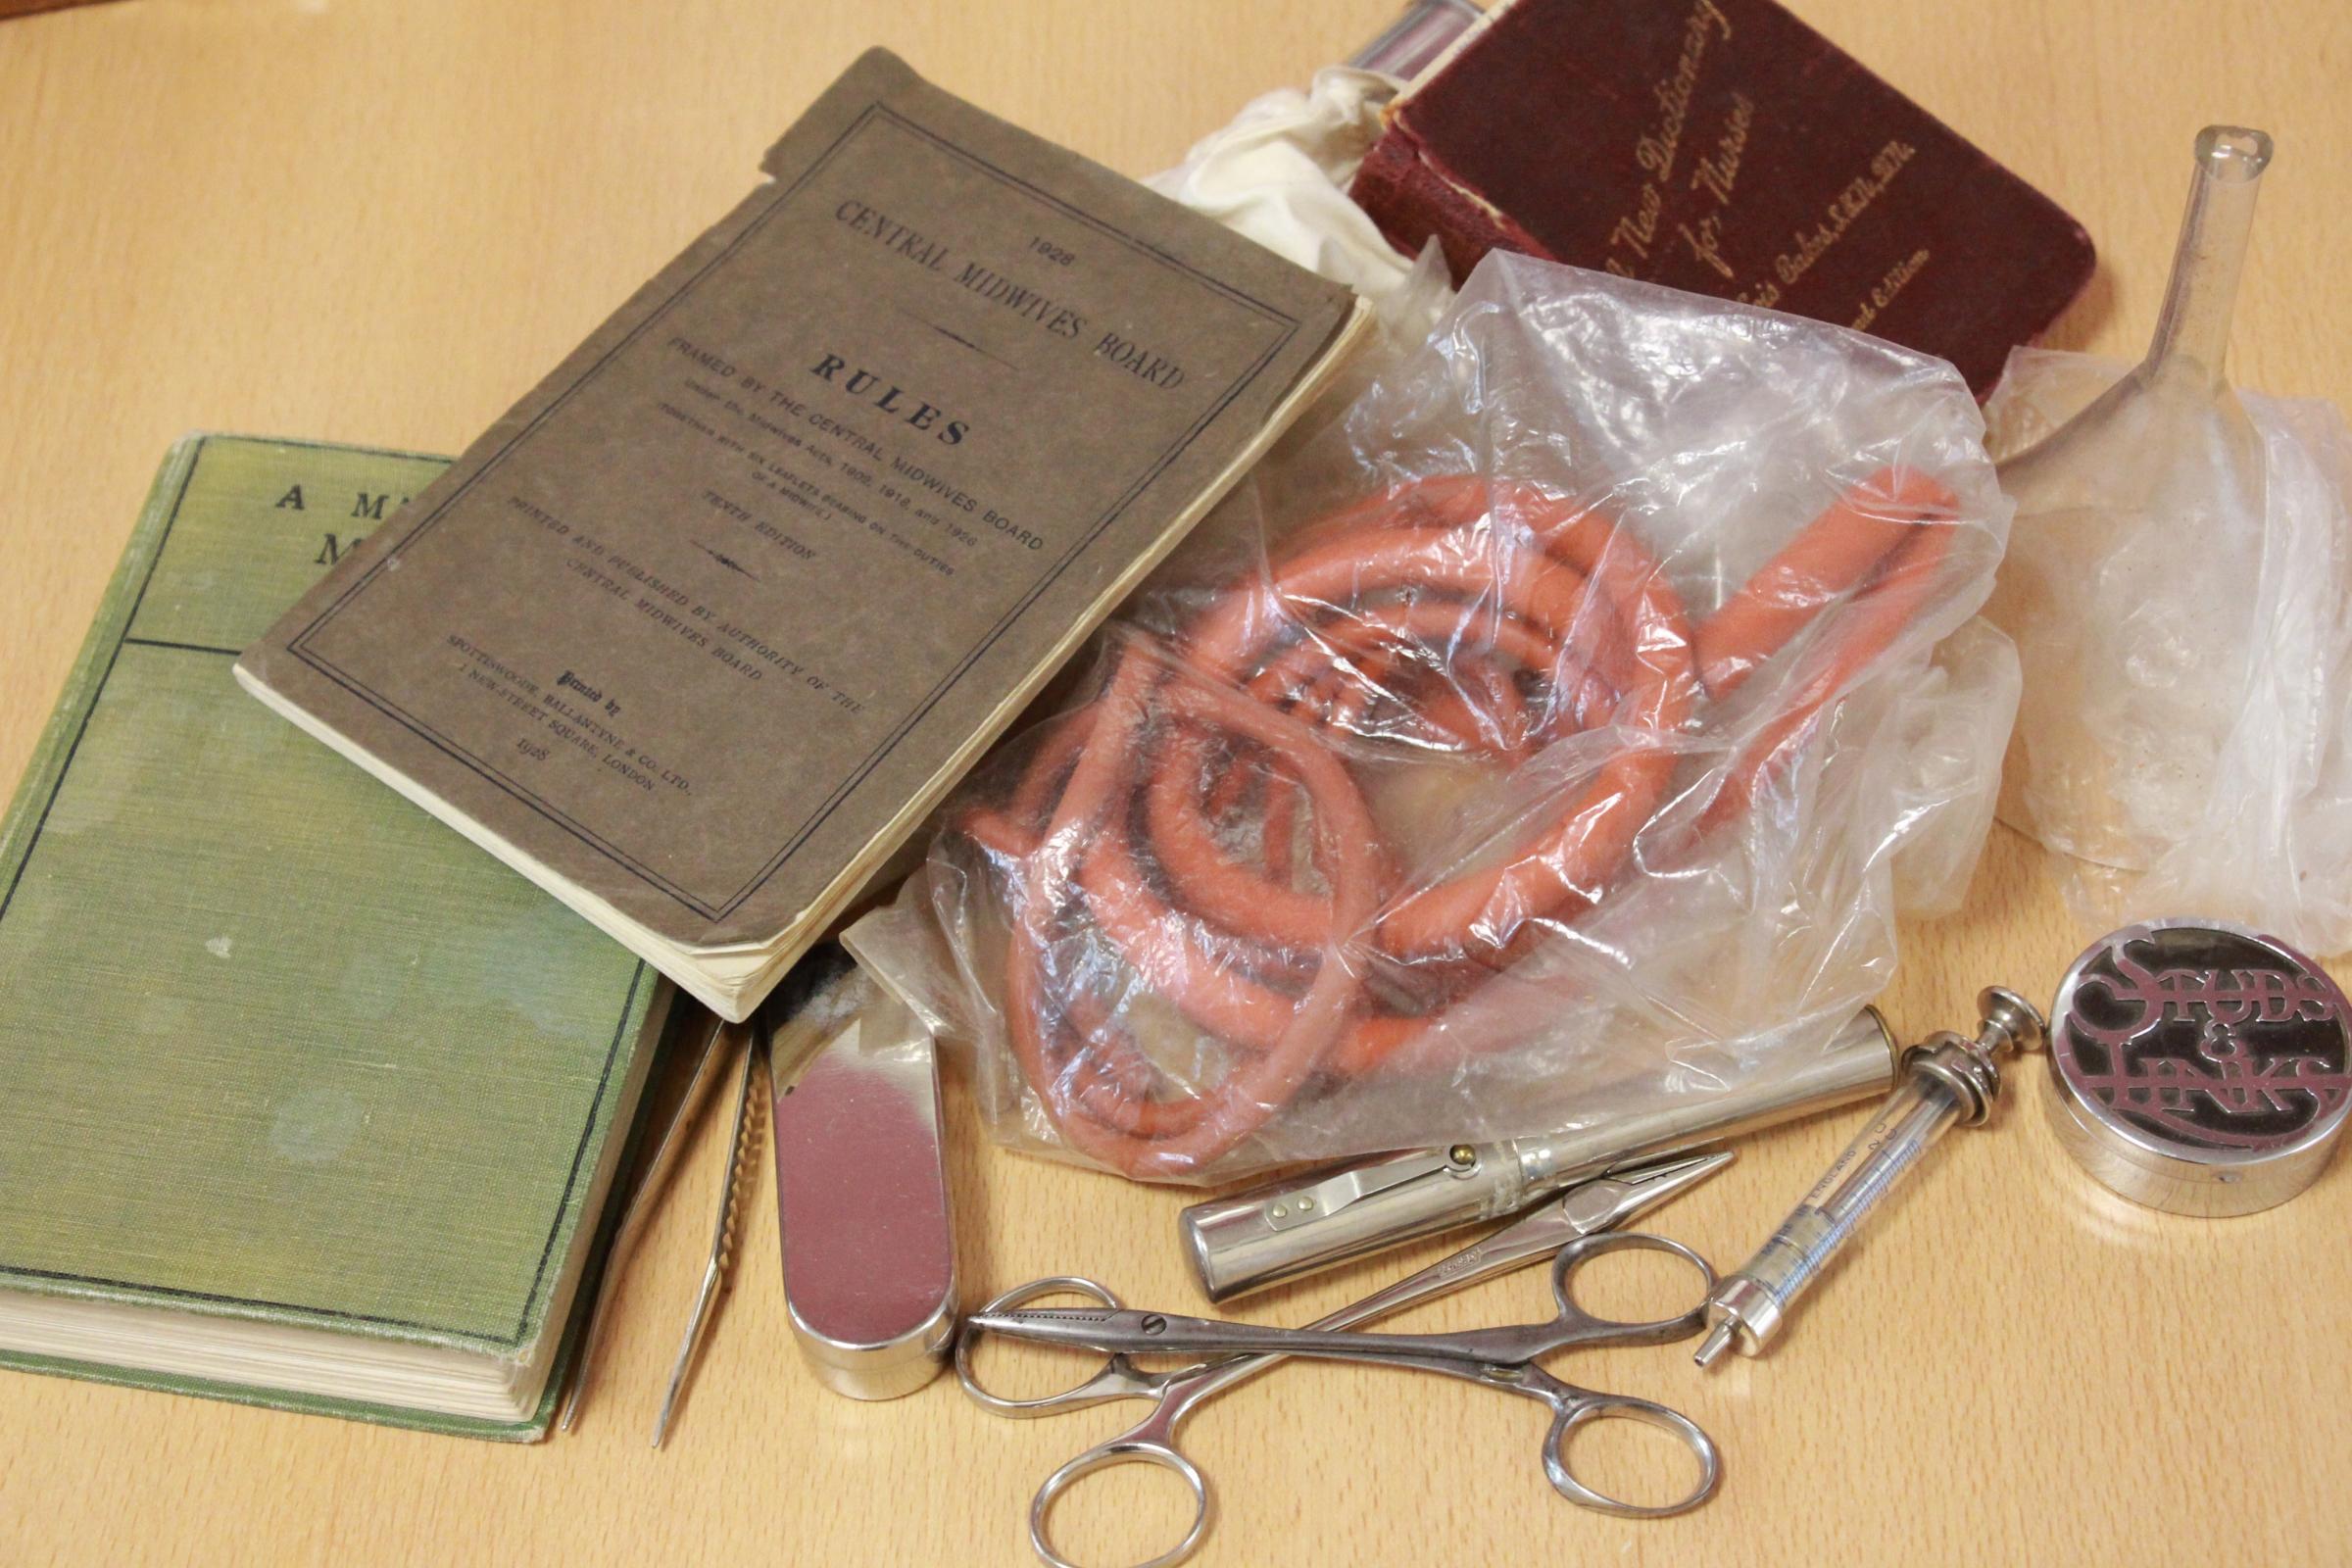 Photos and books give insight into history of North East midwife